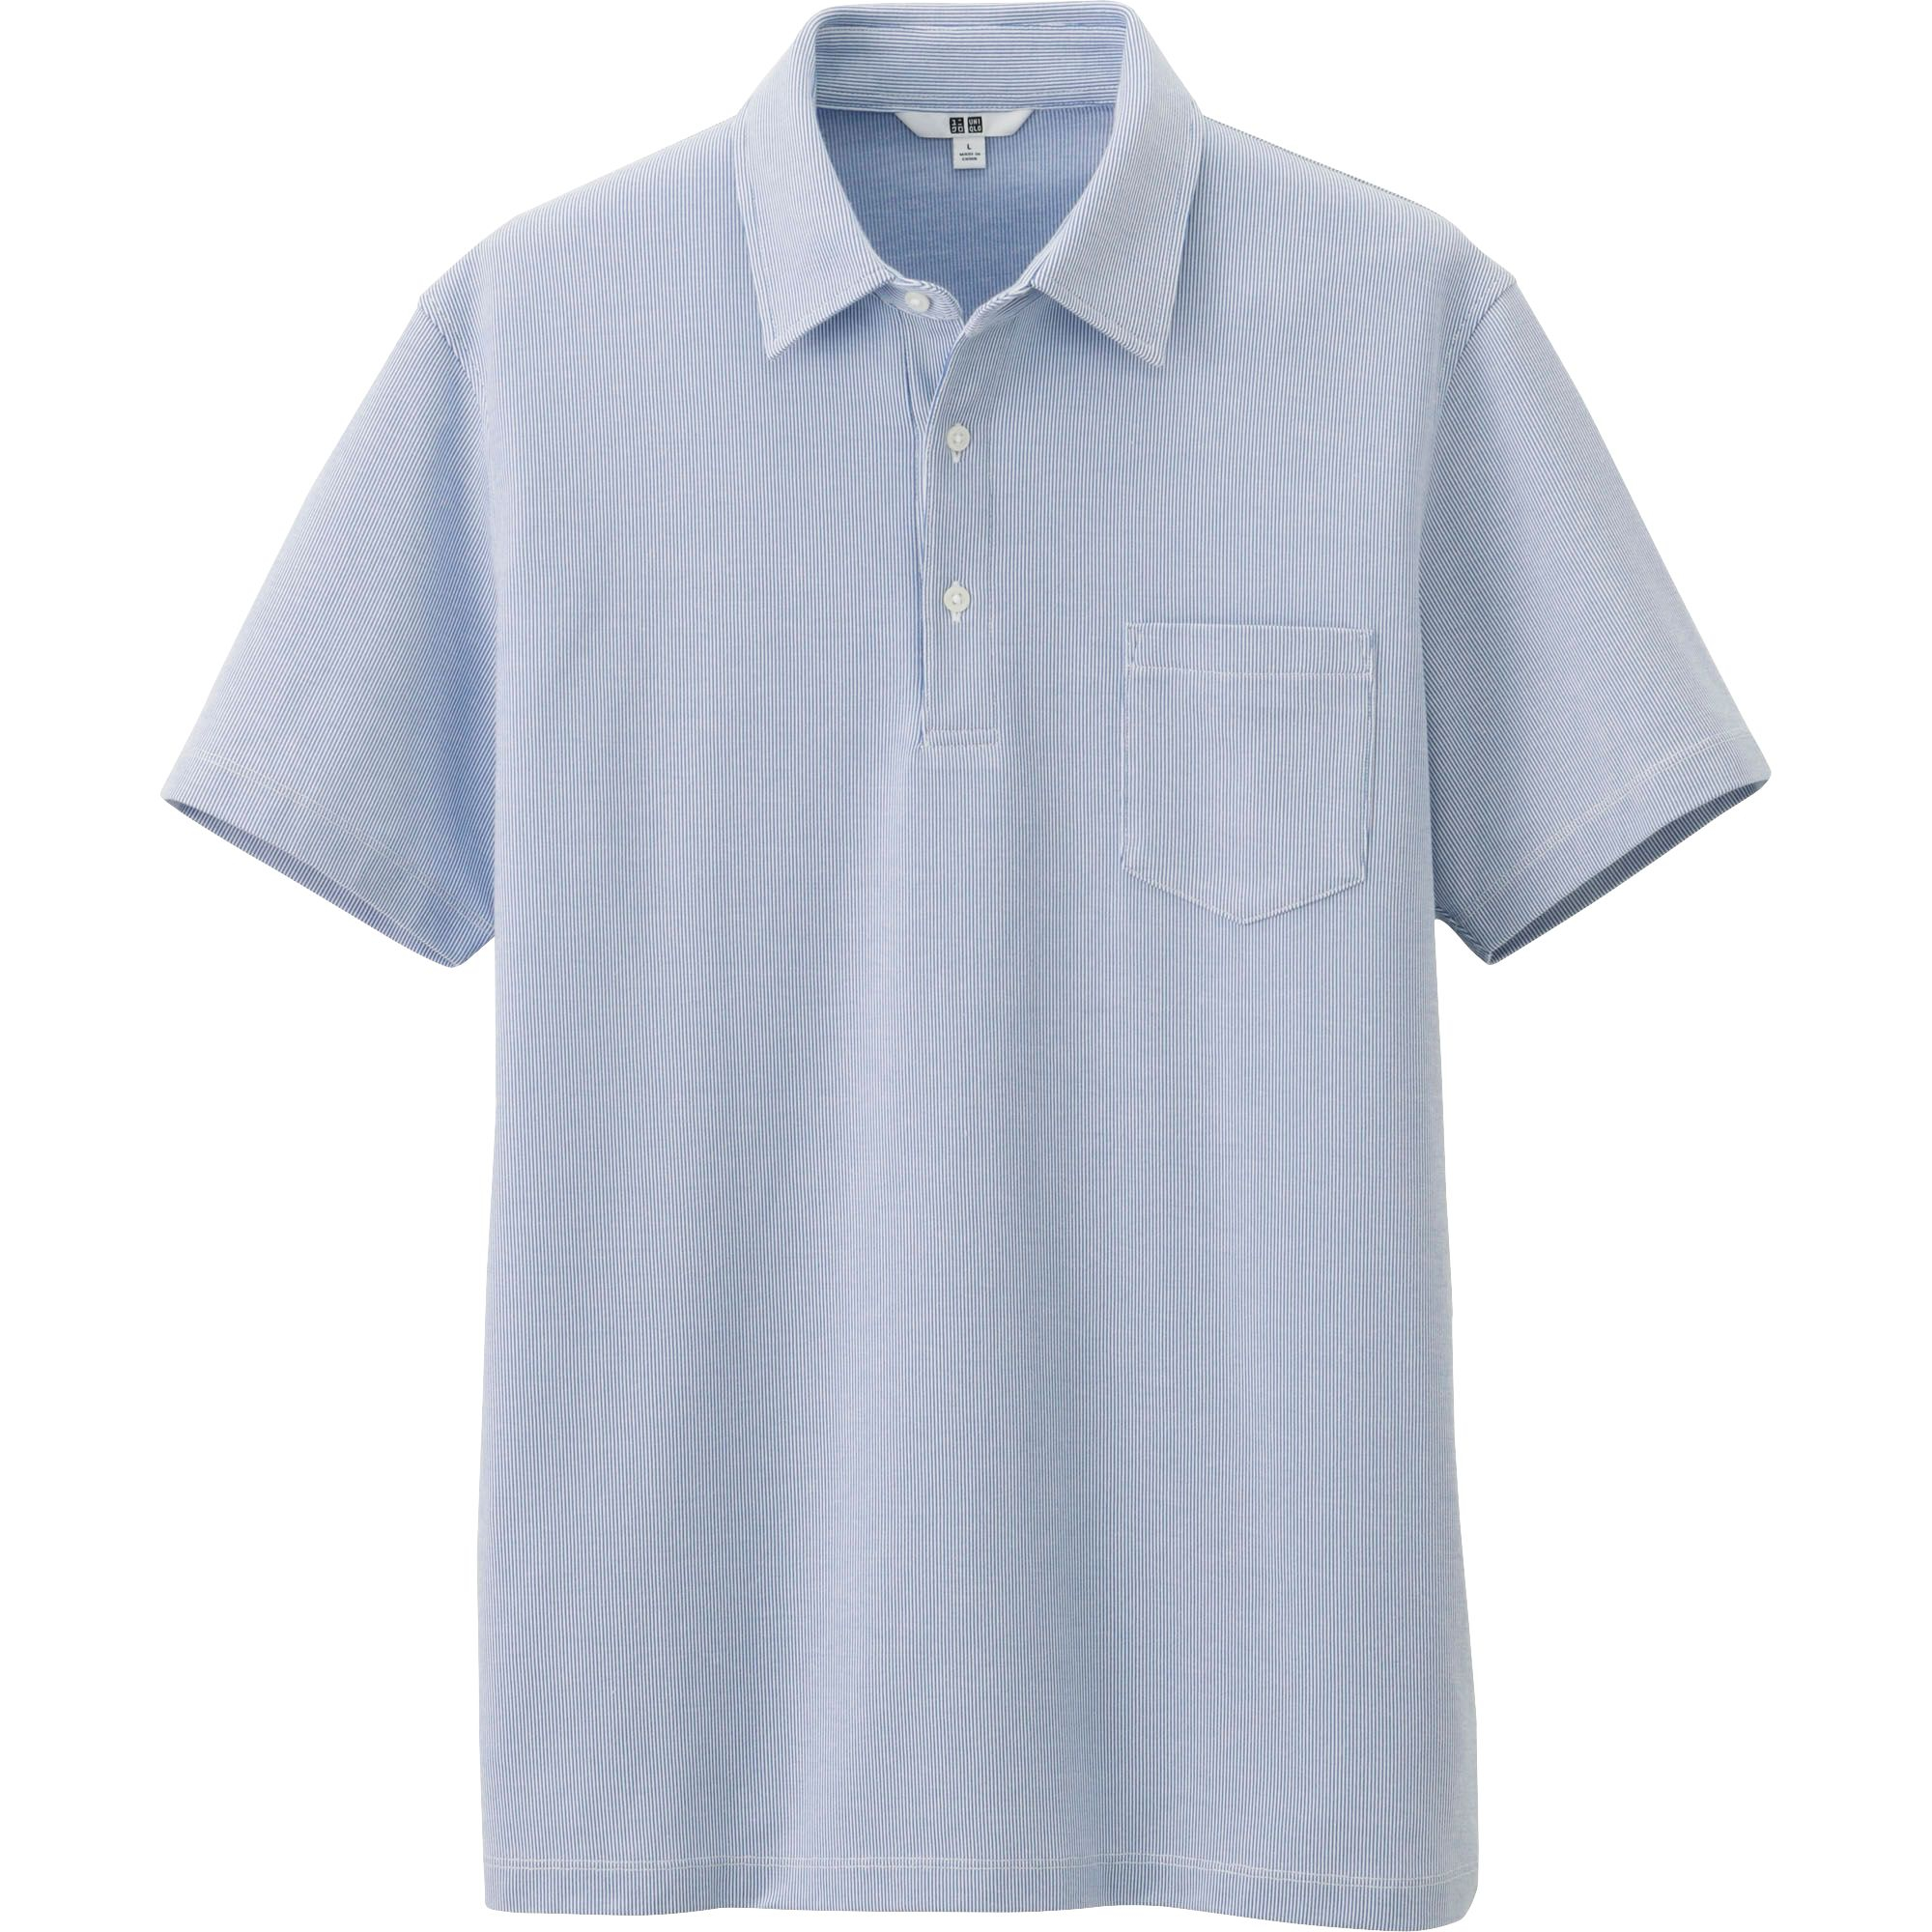  Uniqlo  Dry Shirt  Collar Striped Polo Shirt  in Blue for Men 